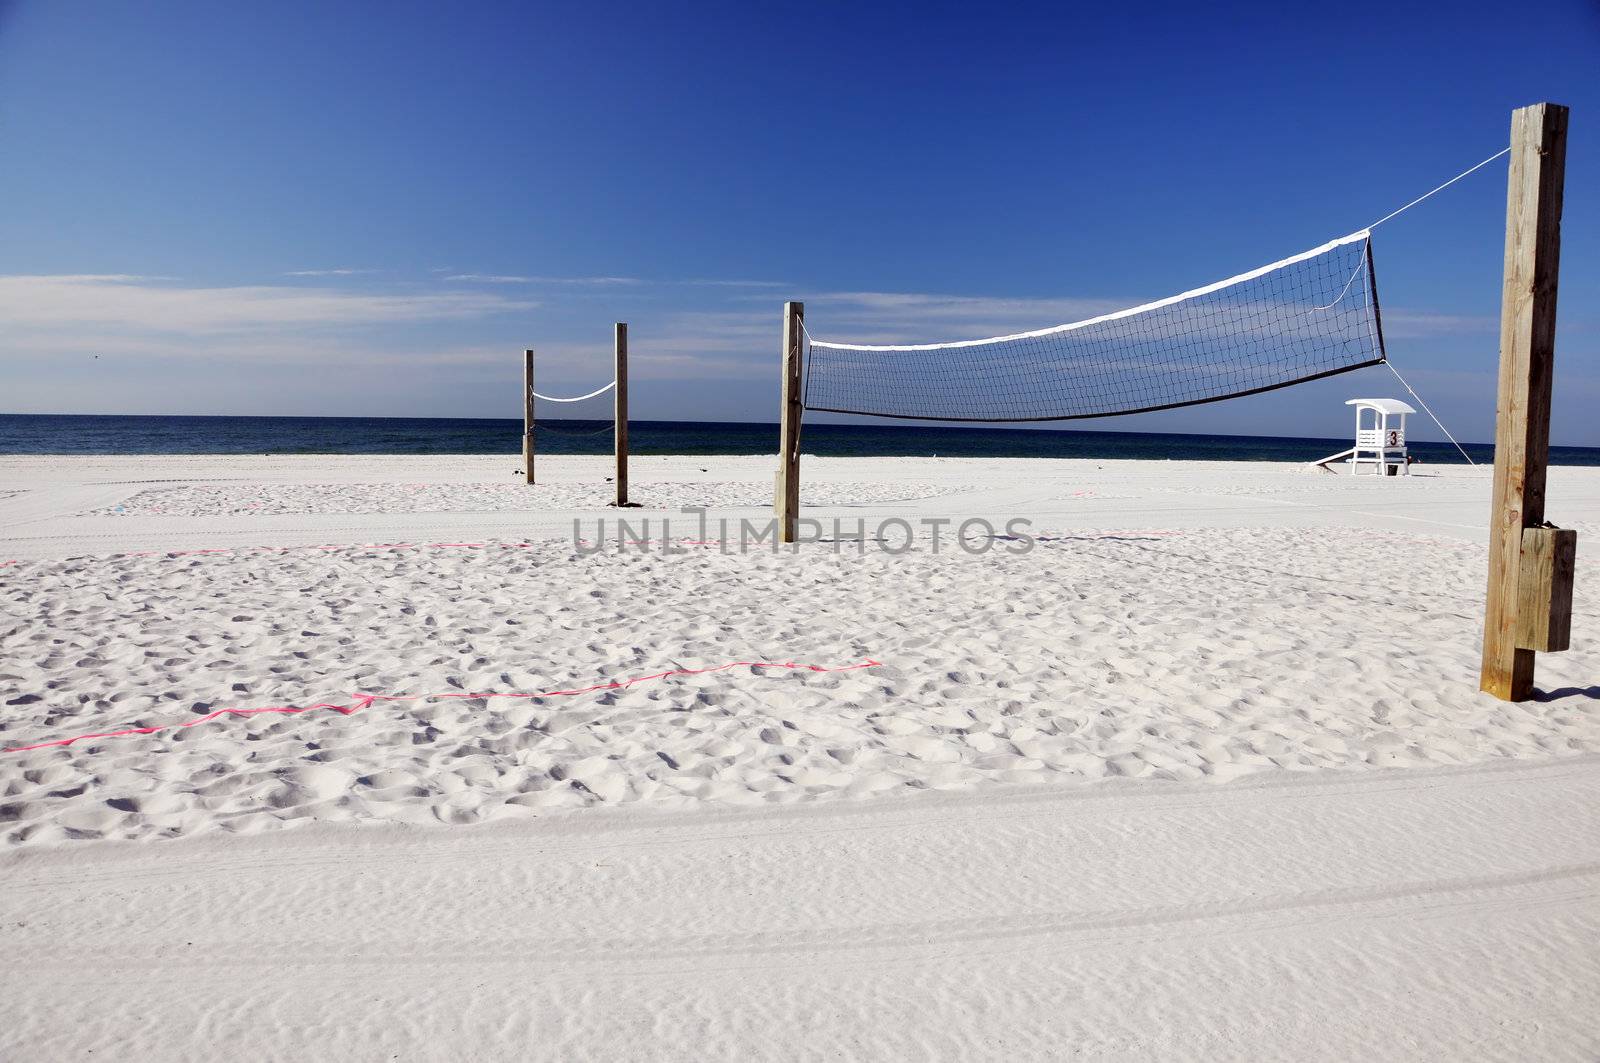 Beach volleyball nets with lifeguard hut in background.